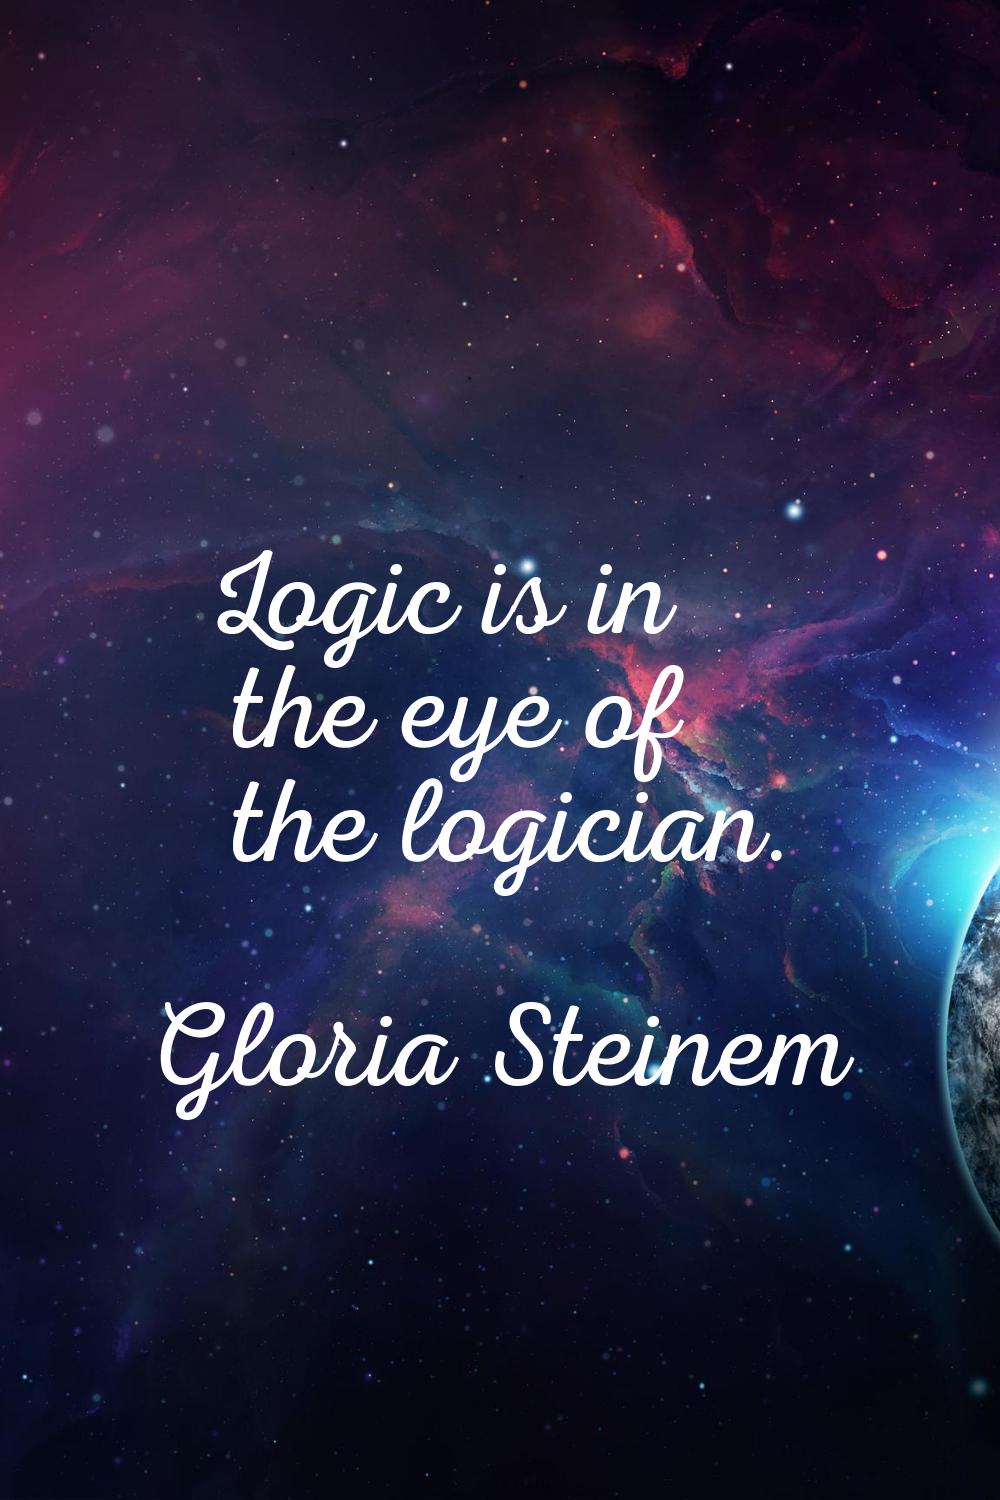 Logic is in the eye of the logician.